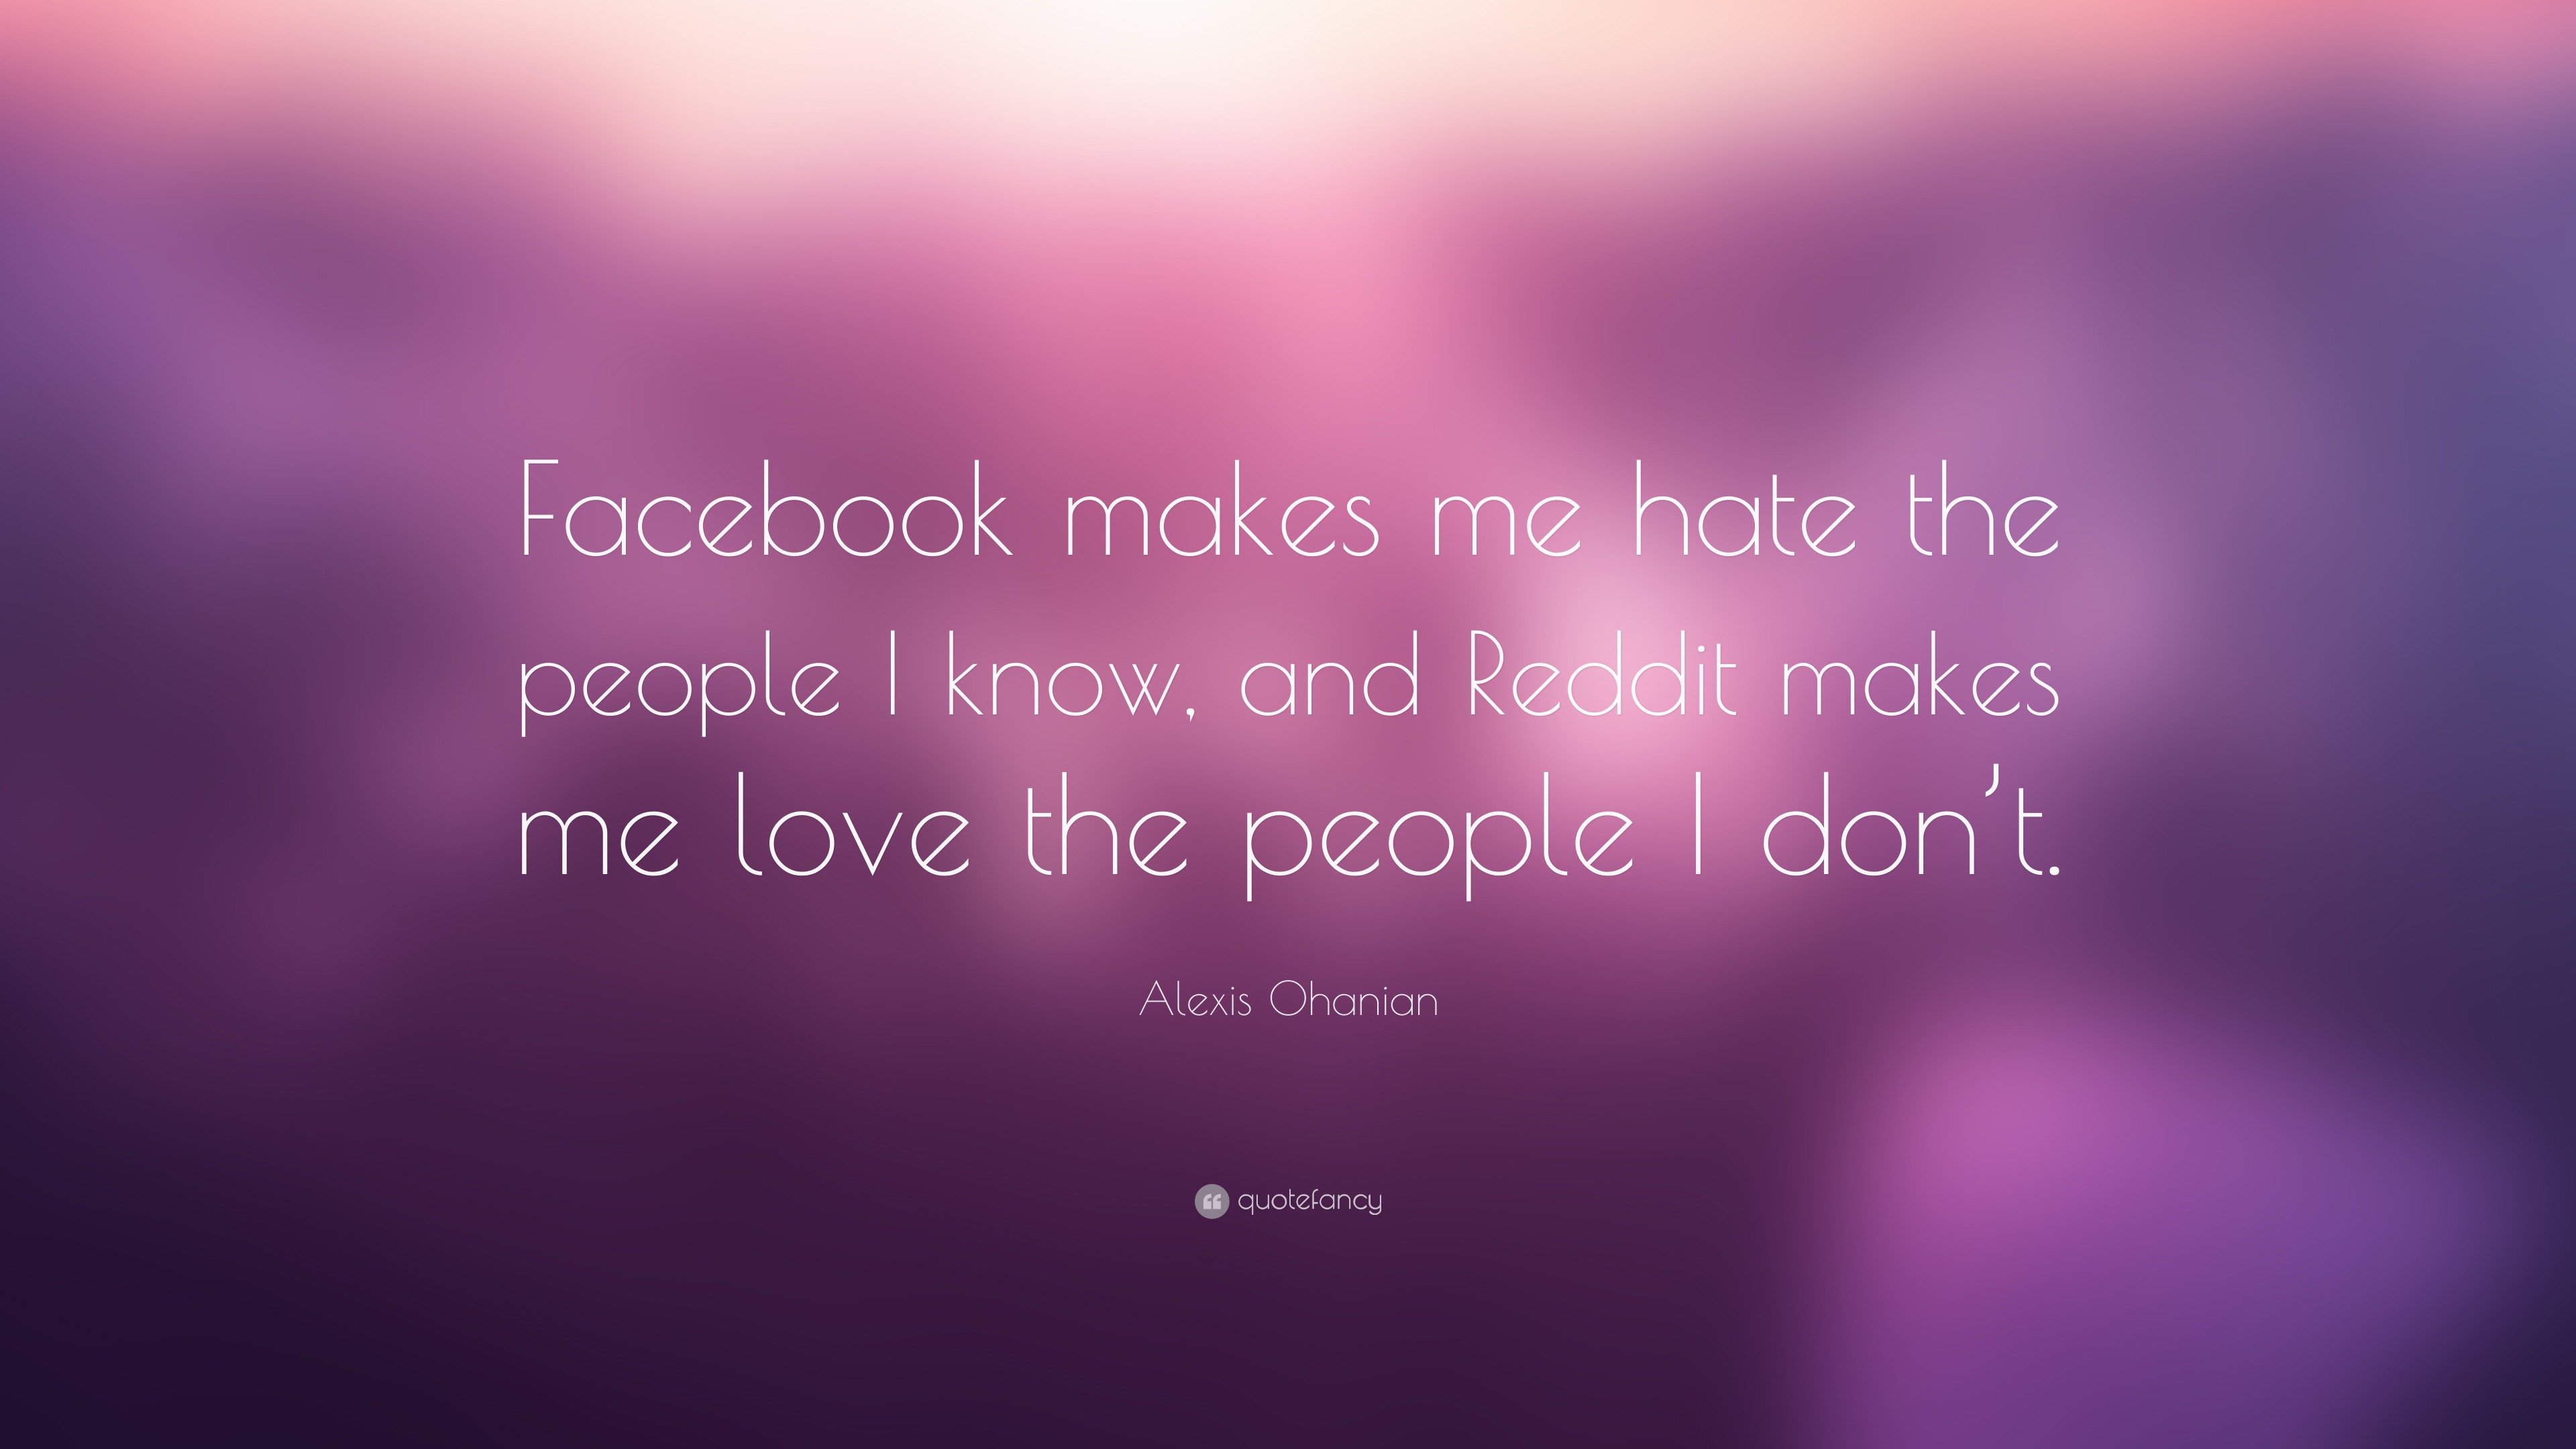 about me quotes and sayings for facebook